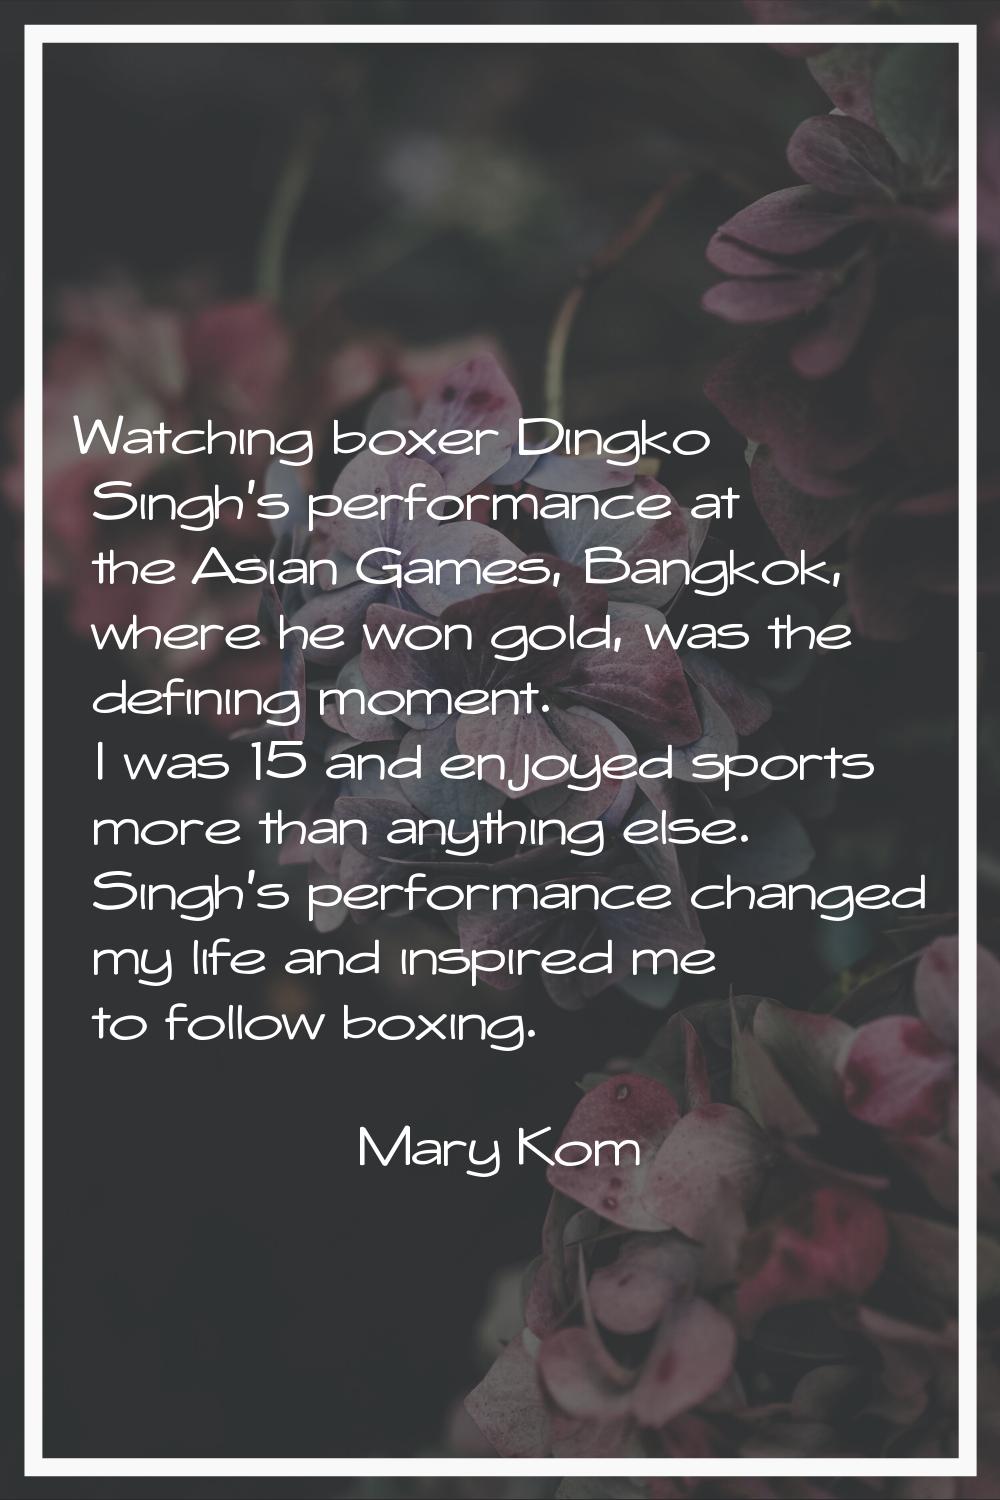 Watching boxer Dingko Singh's performance at the Asian Games, Bangkok, where he won gold, was the d